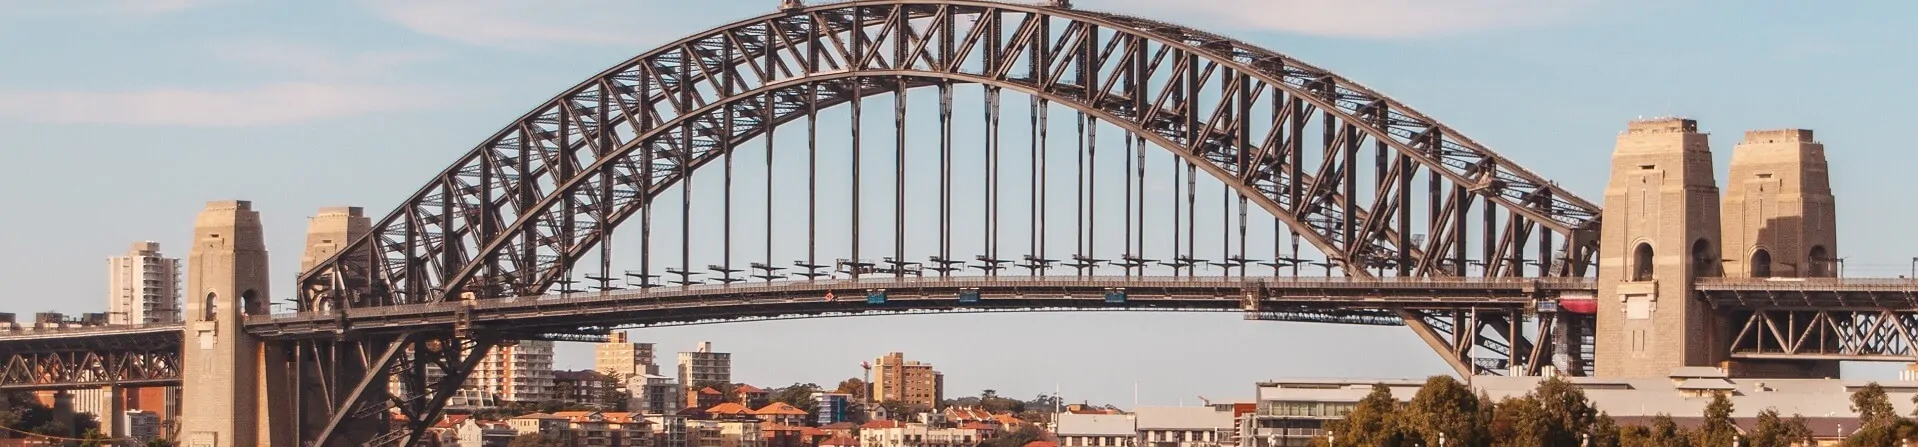 What are 3 interesting facts about Sydney?